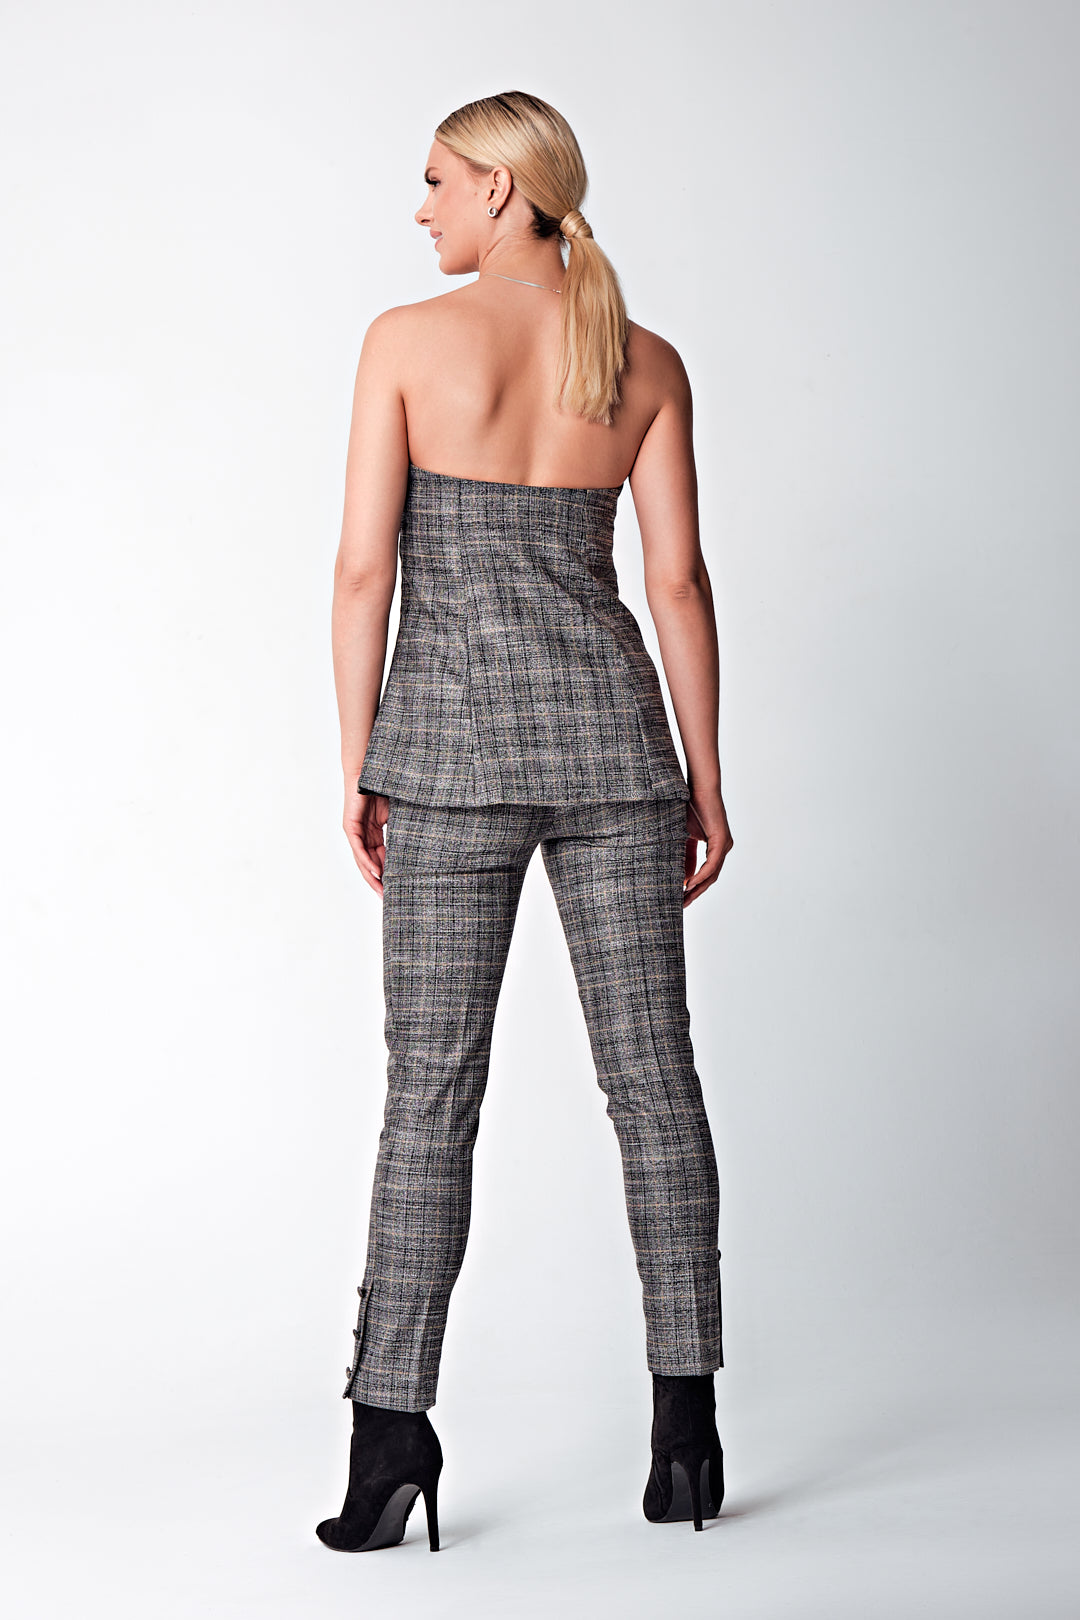 Paola | Ankle-length silver plaid trousers